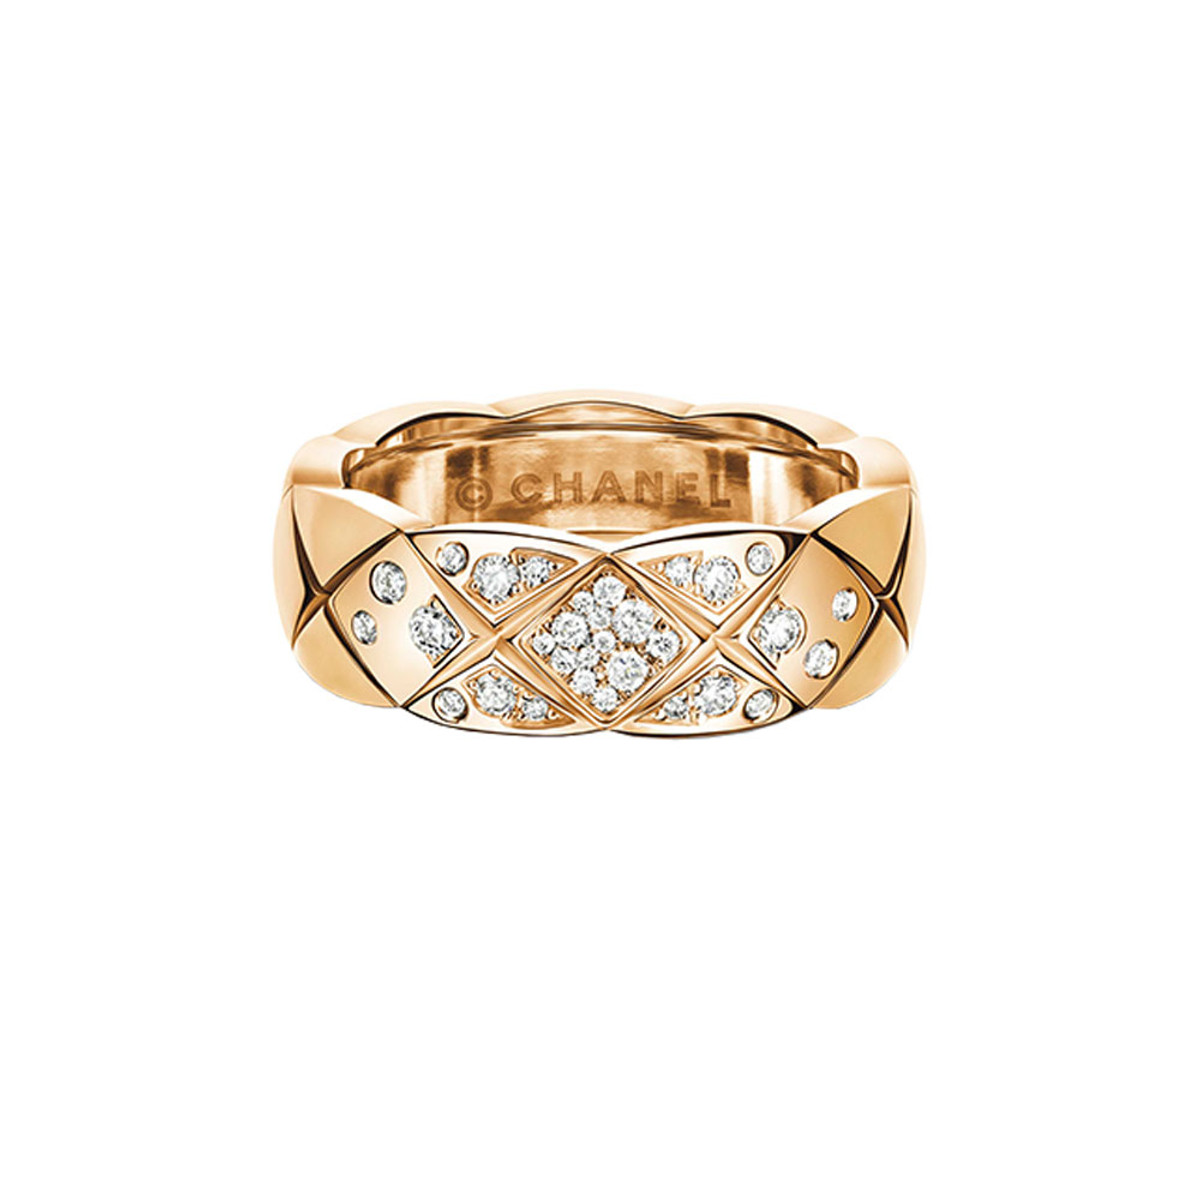 CHANEL COCO CRUSH RING-25959 Product Image